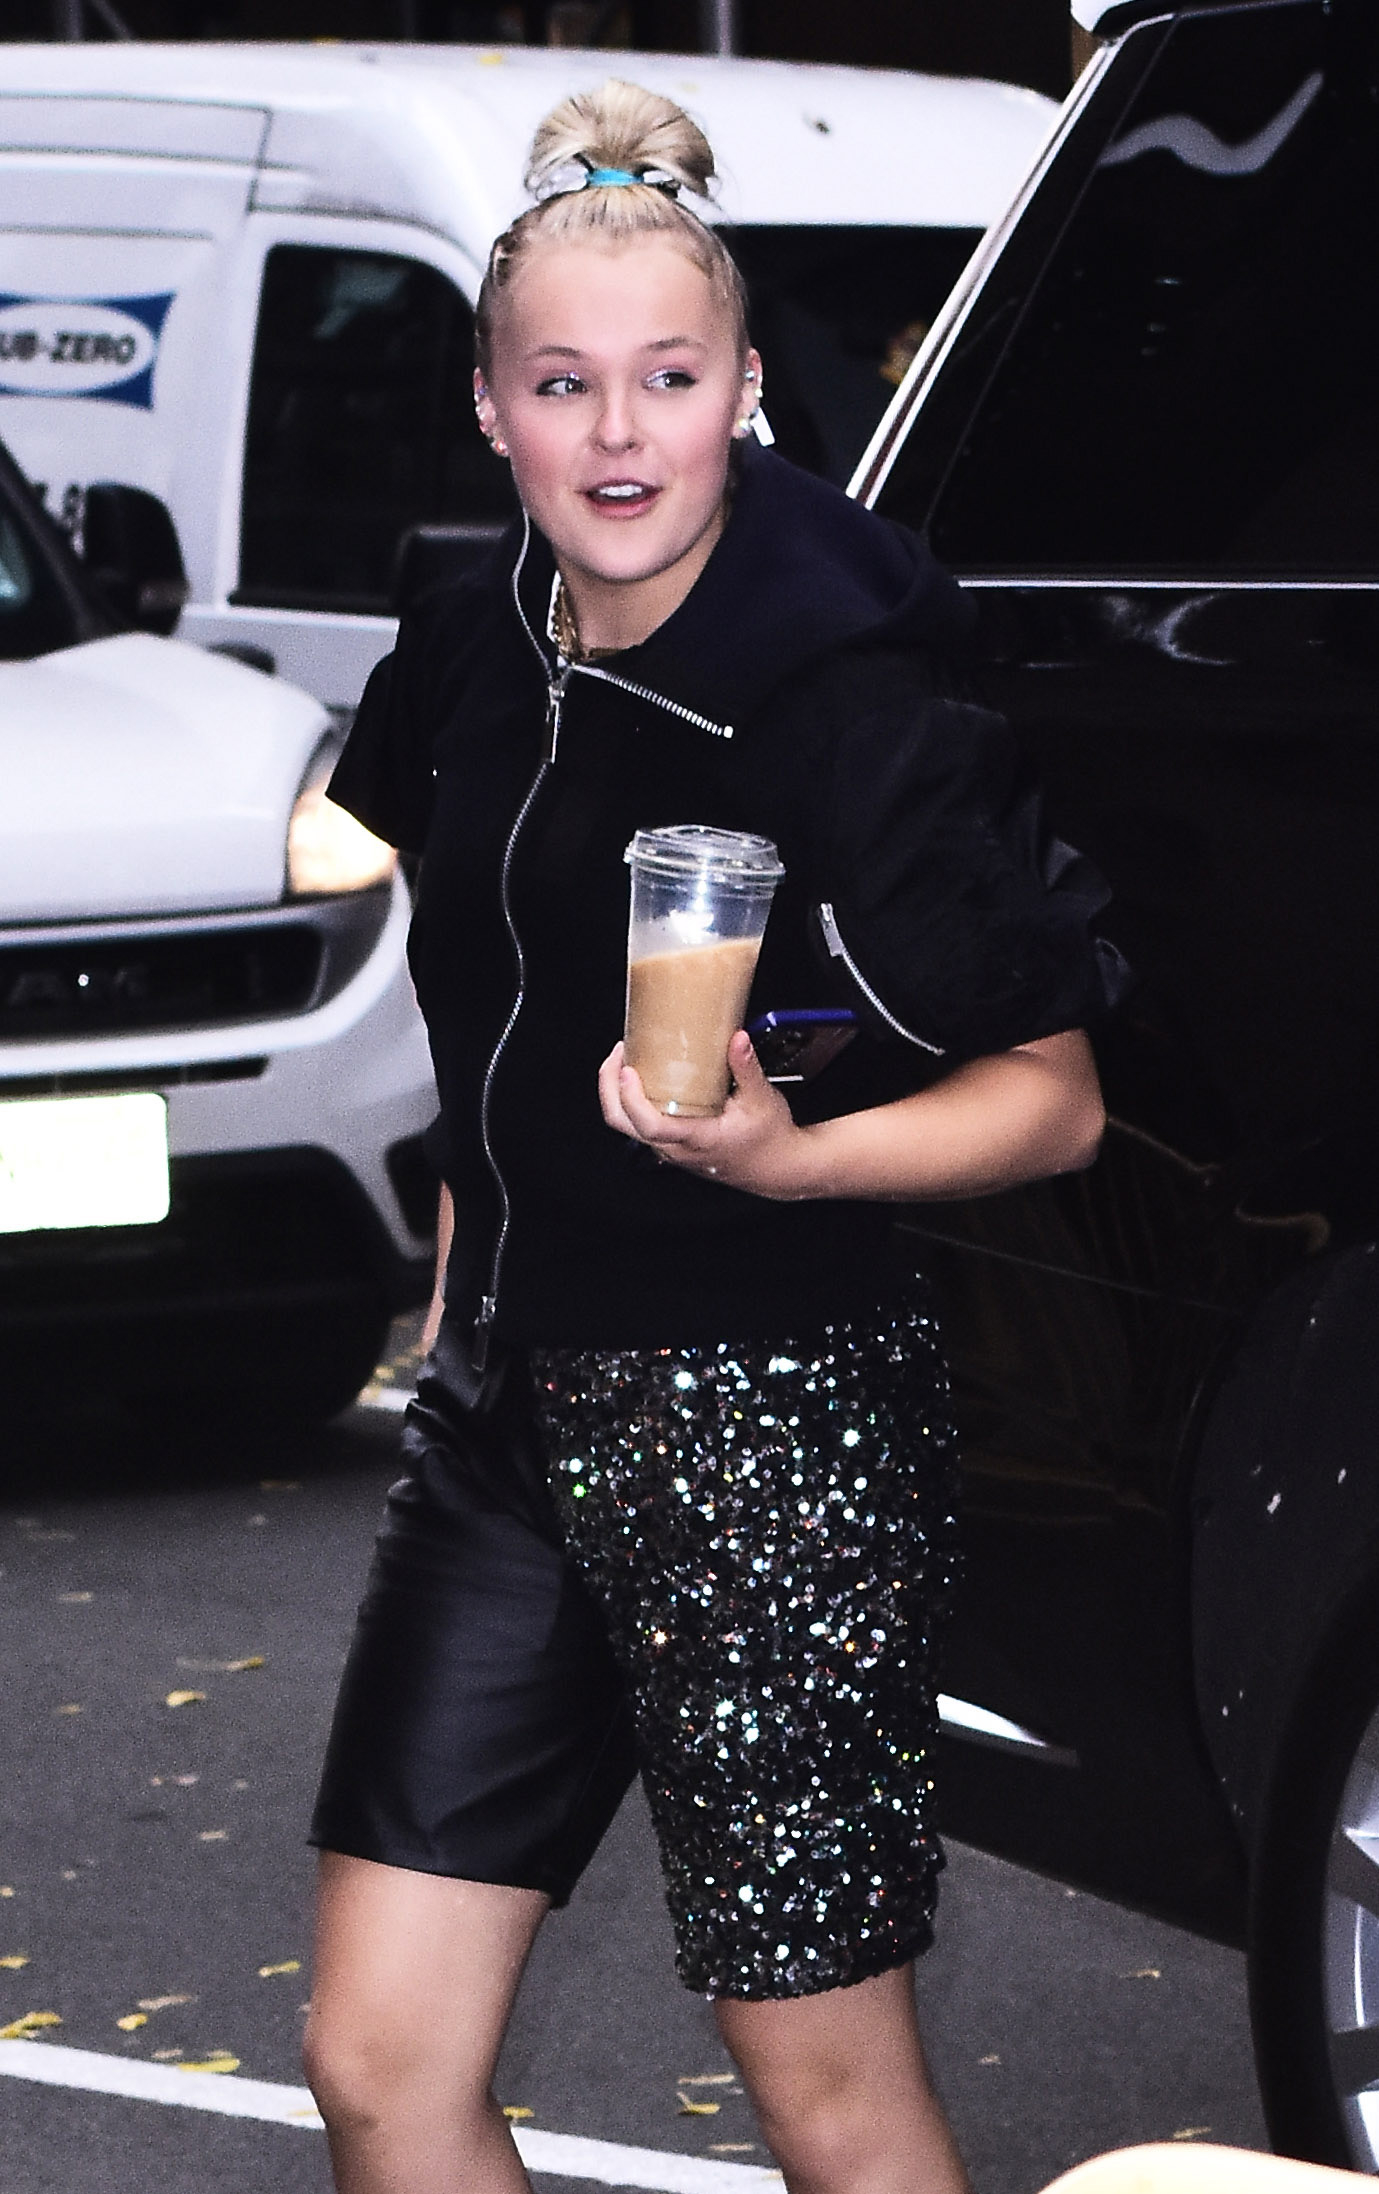 JoJo Siwa in a black jacket and sparkly skirt, holding a drink, walking on the street